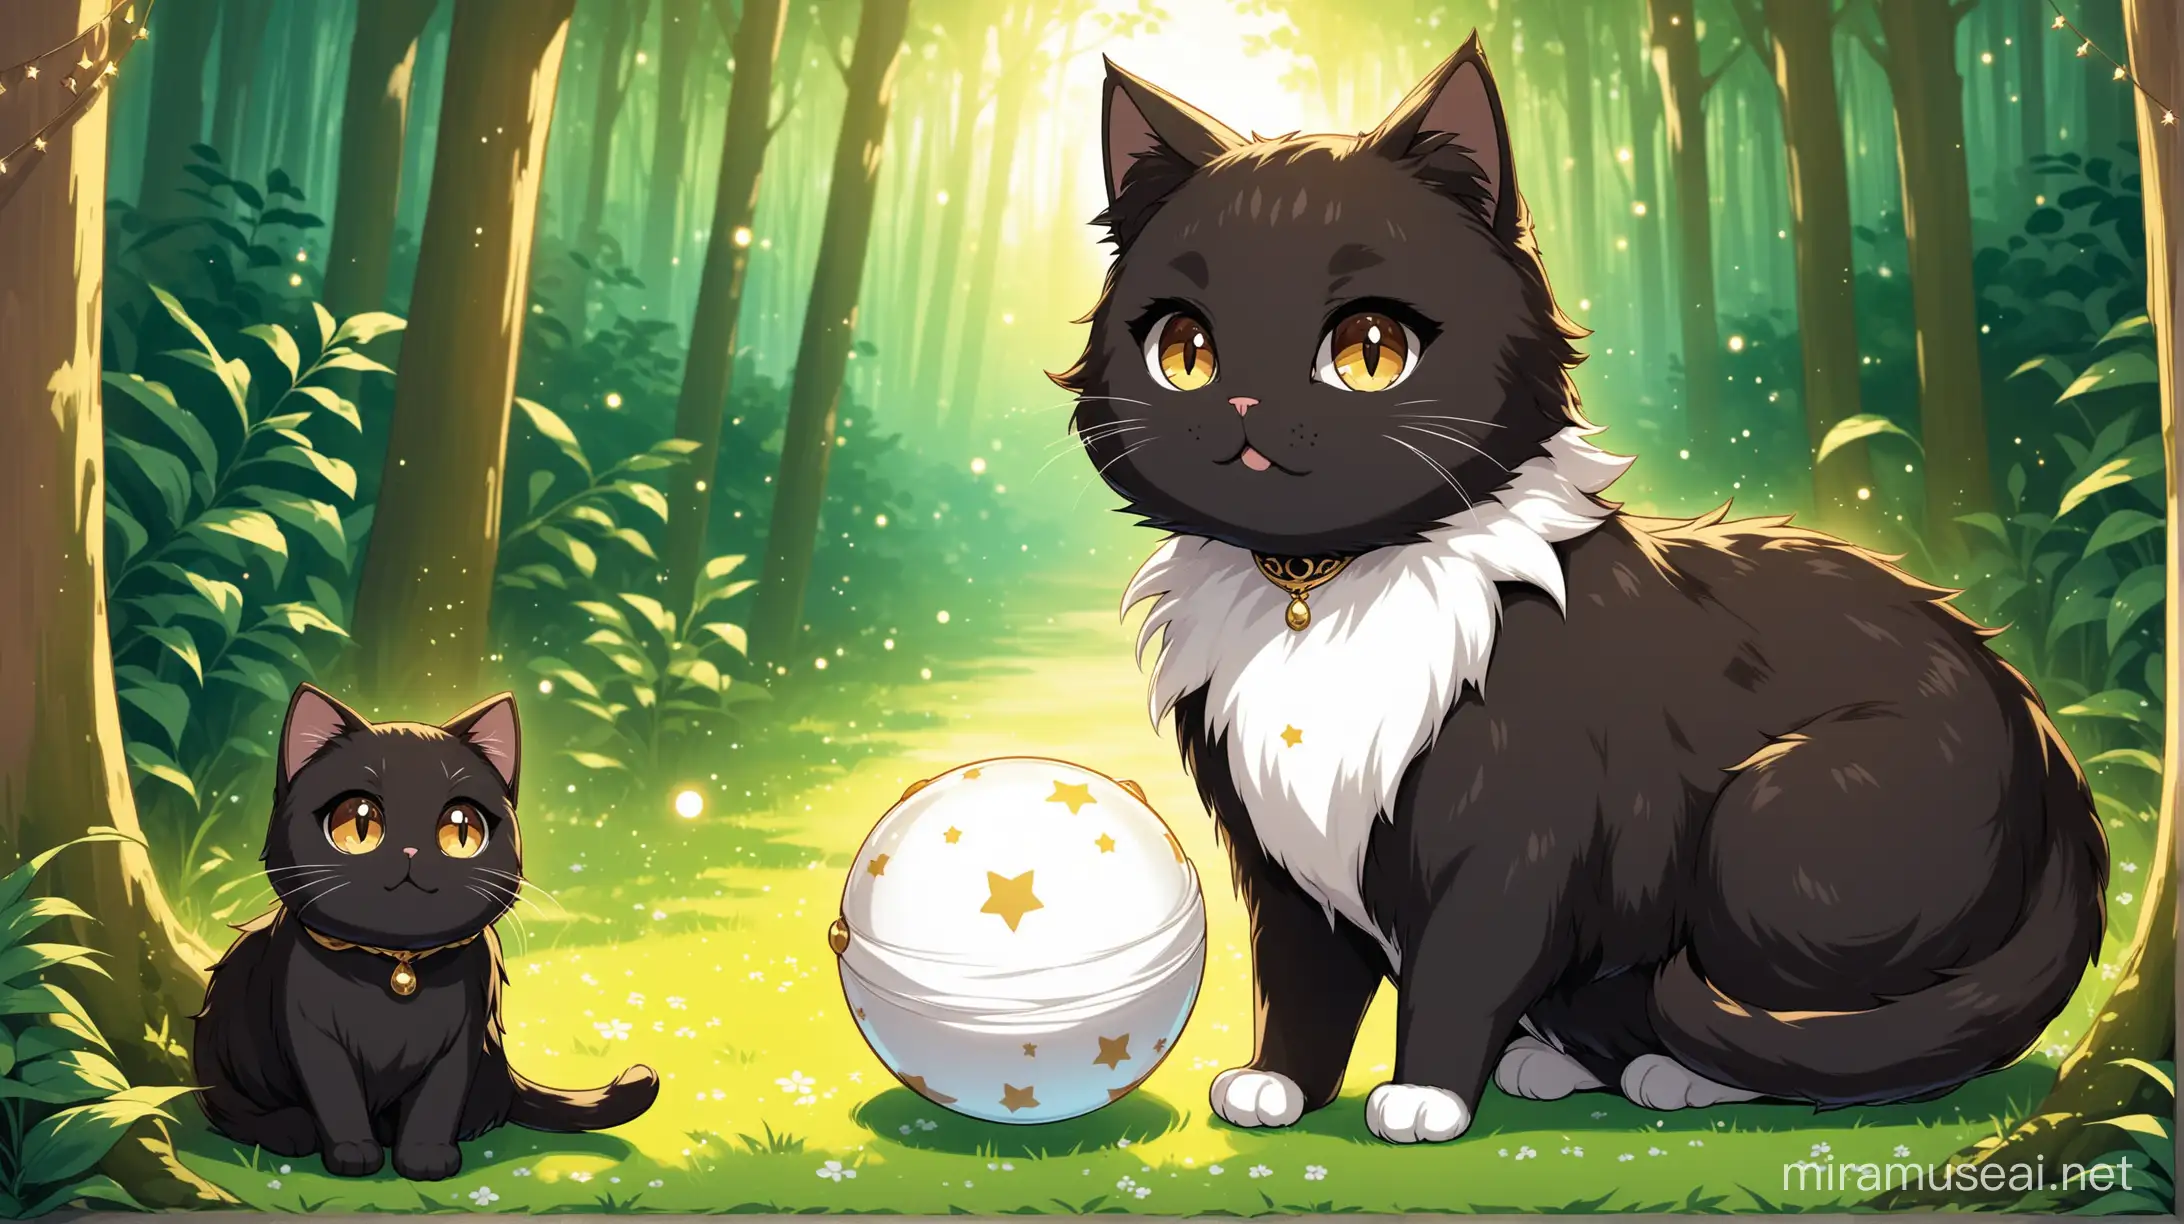 Two Furry Cats Await Ramadan Celebration in Enchanted Forest